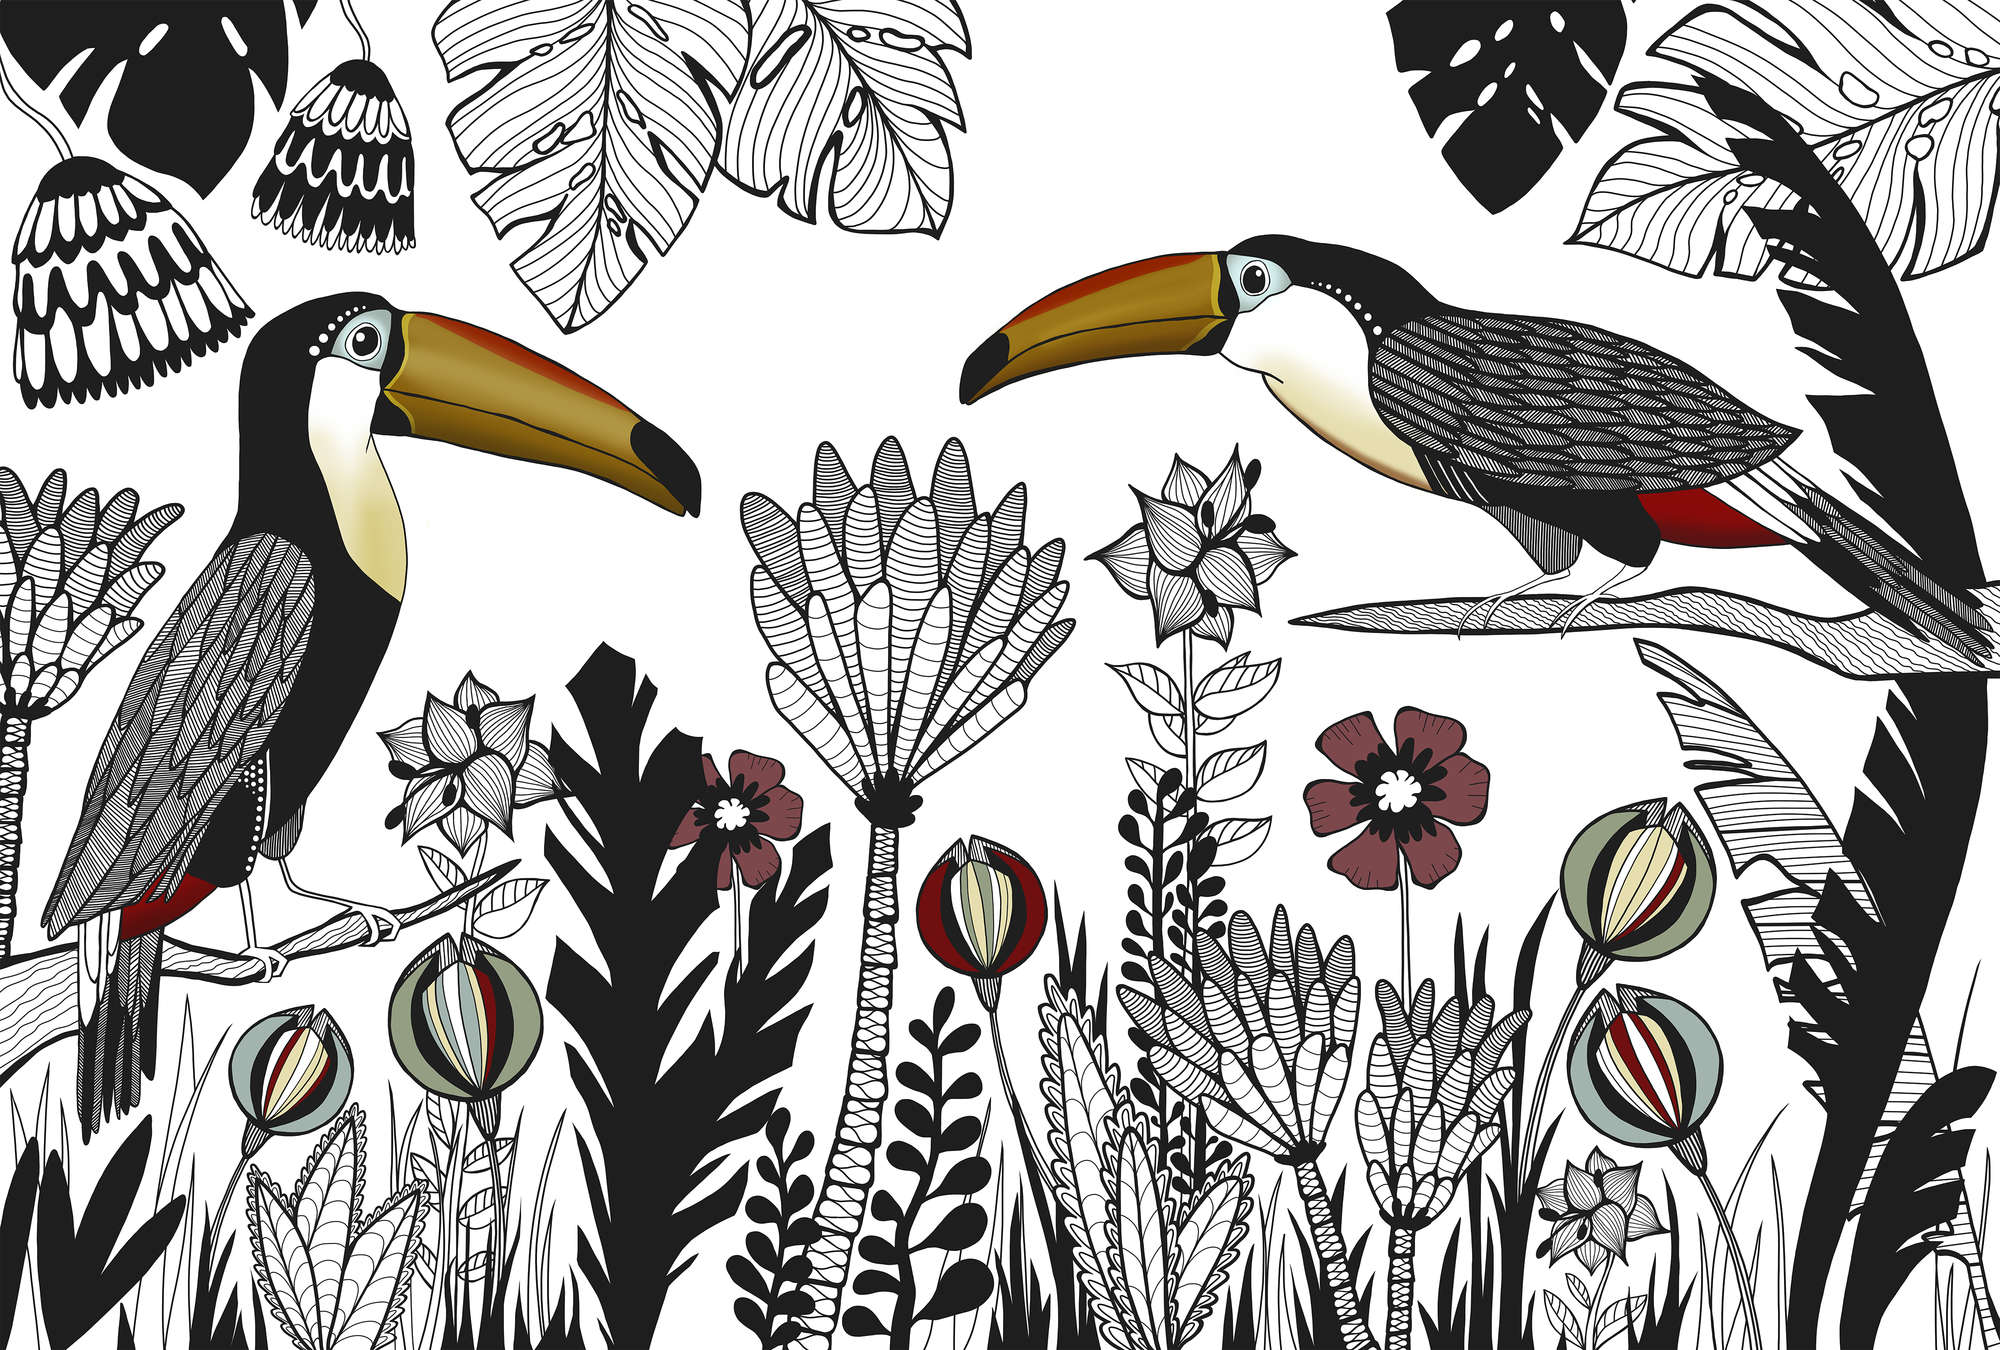             Bird mural toucan with tropical pattern in drawing style
        